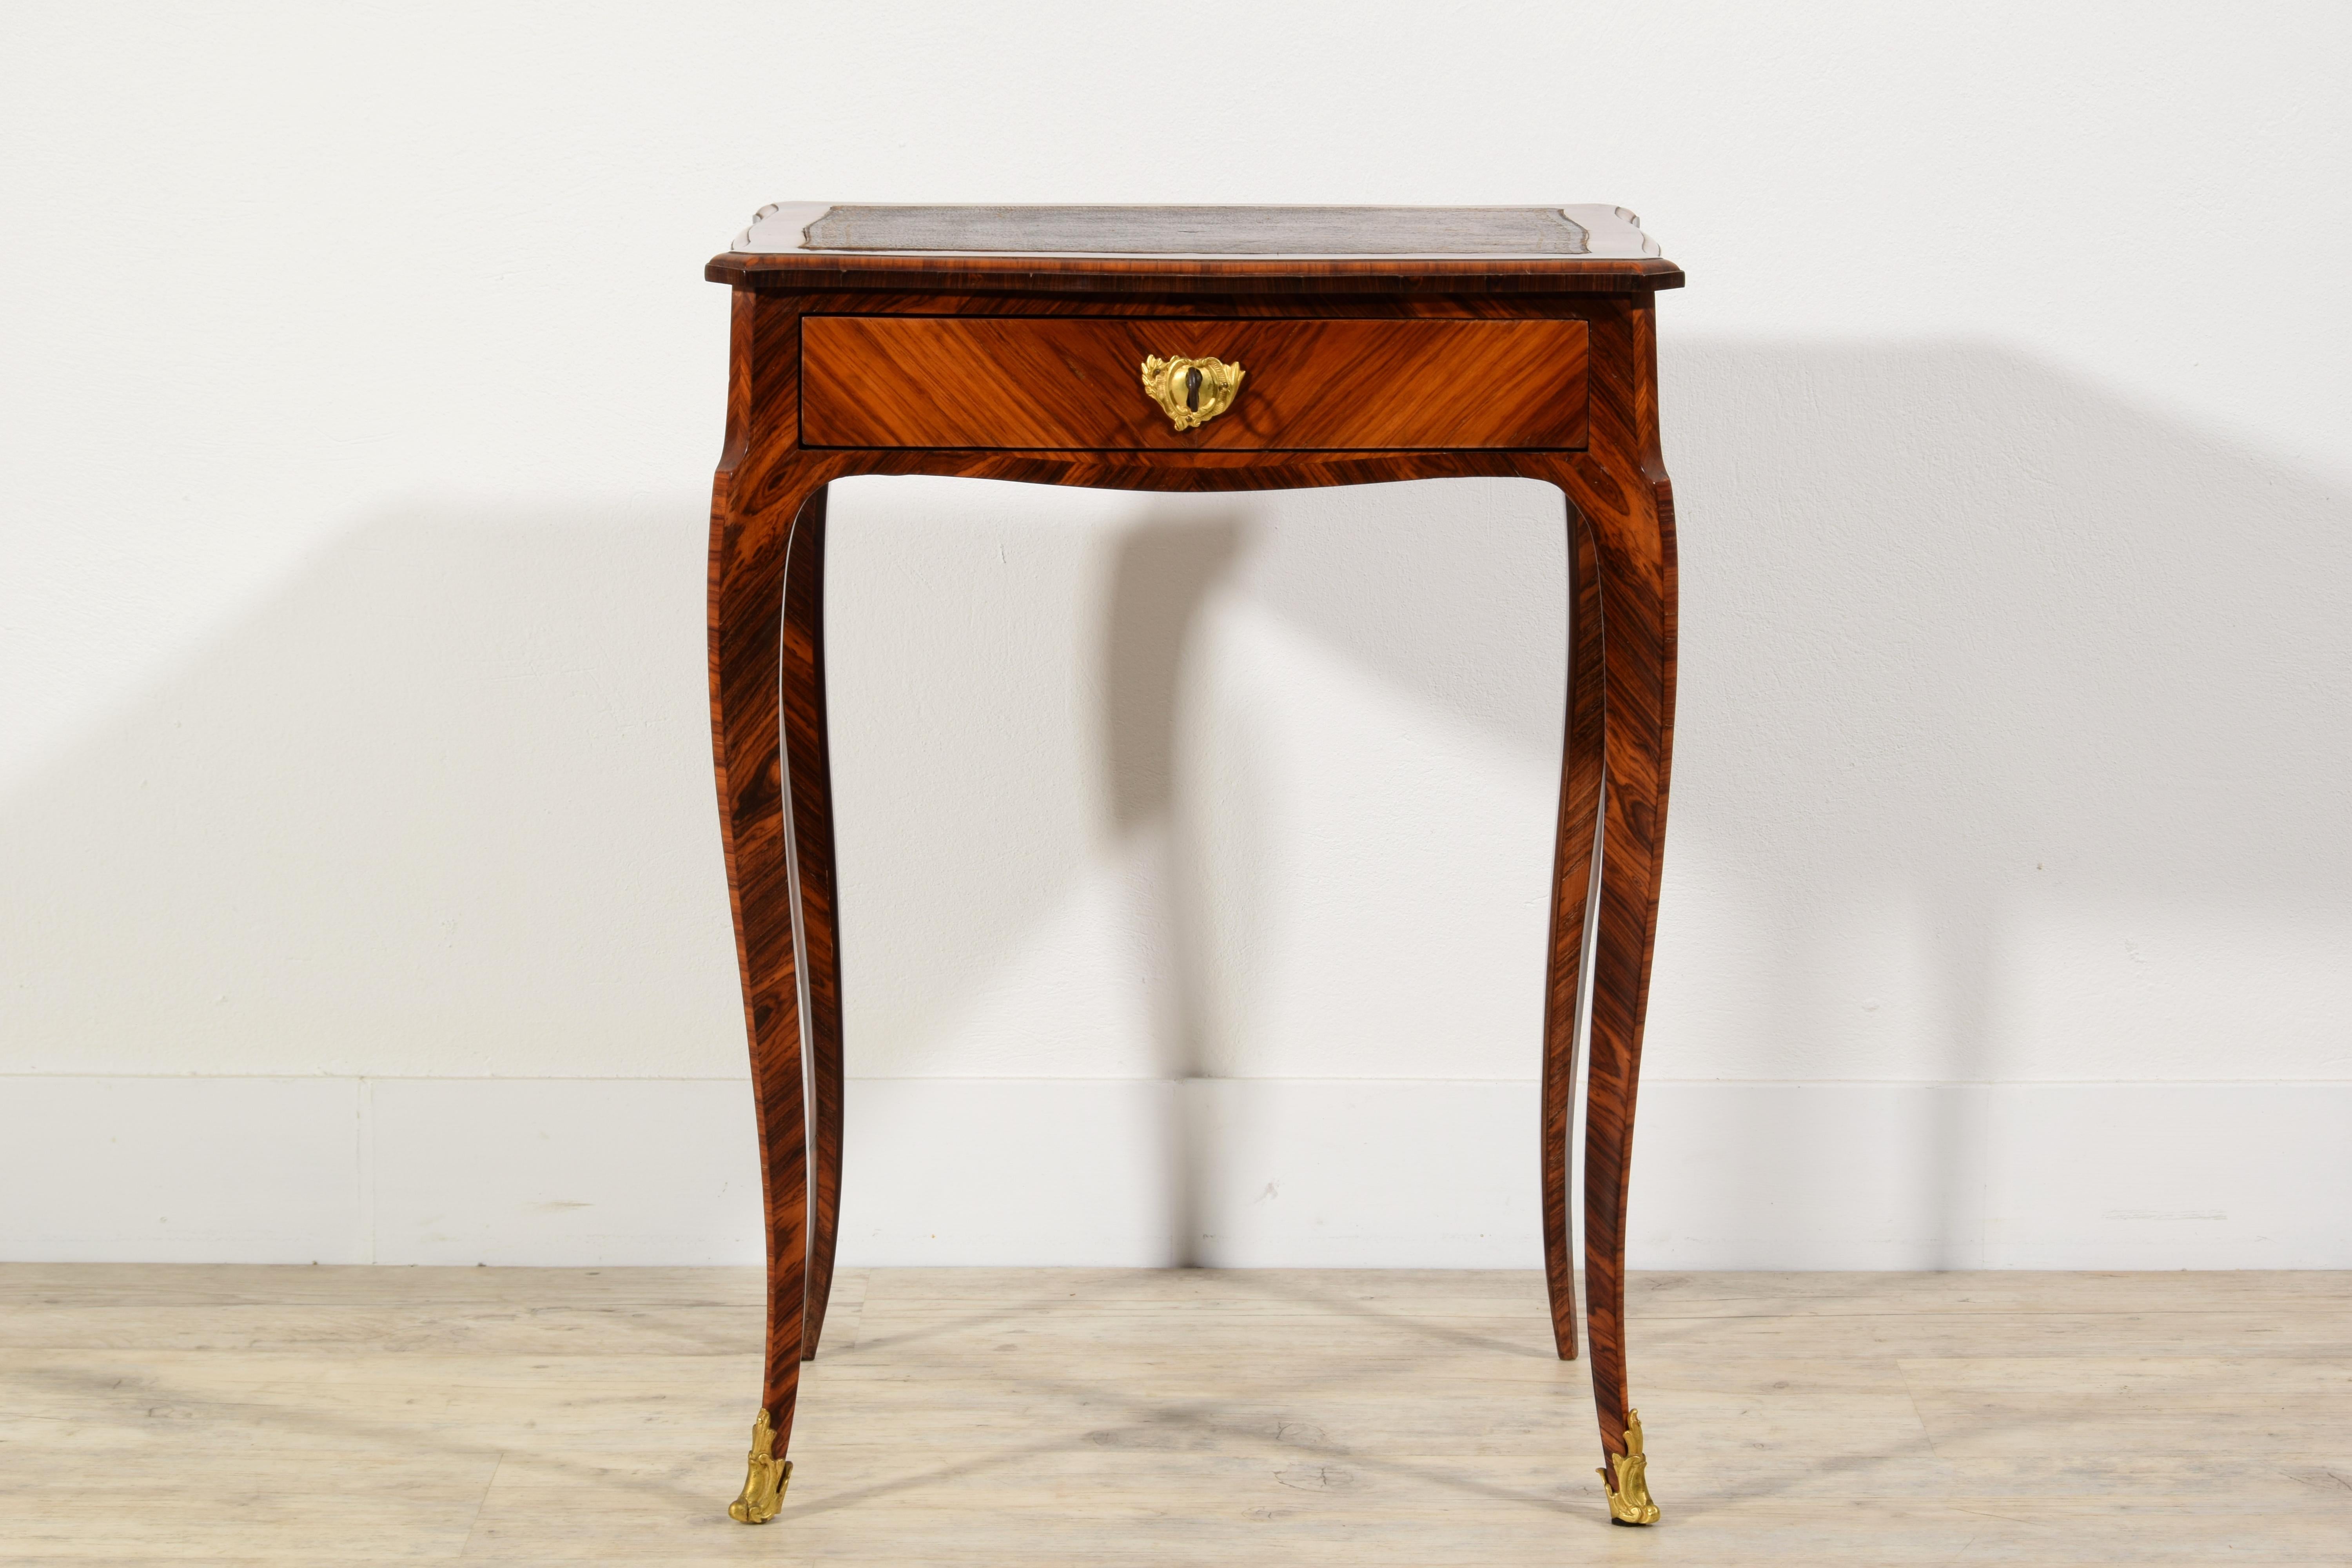 18th Century, French Louis XV violet wood coffee table.
Ancient provevance: Collection Fondazione Accorsi-Ometto, Turin
The elegant and refined Louis XV coffee table, made in France in the eighteenth century, is paved with precious violet wood,